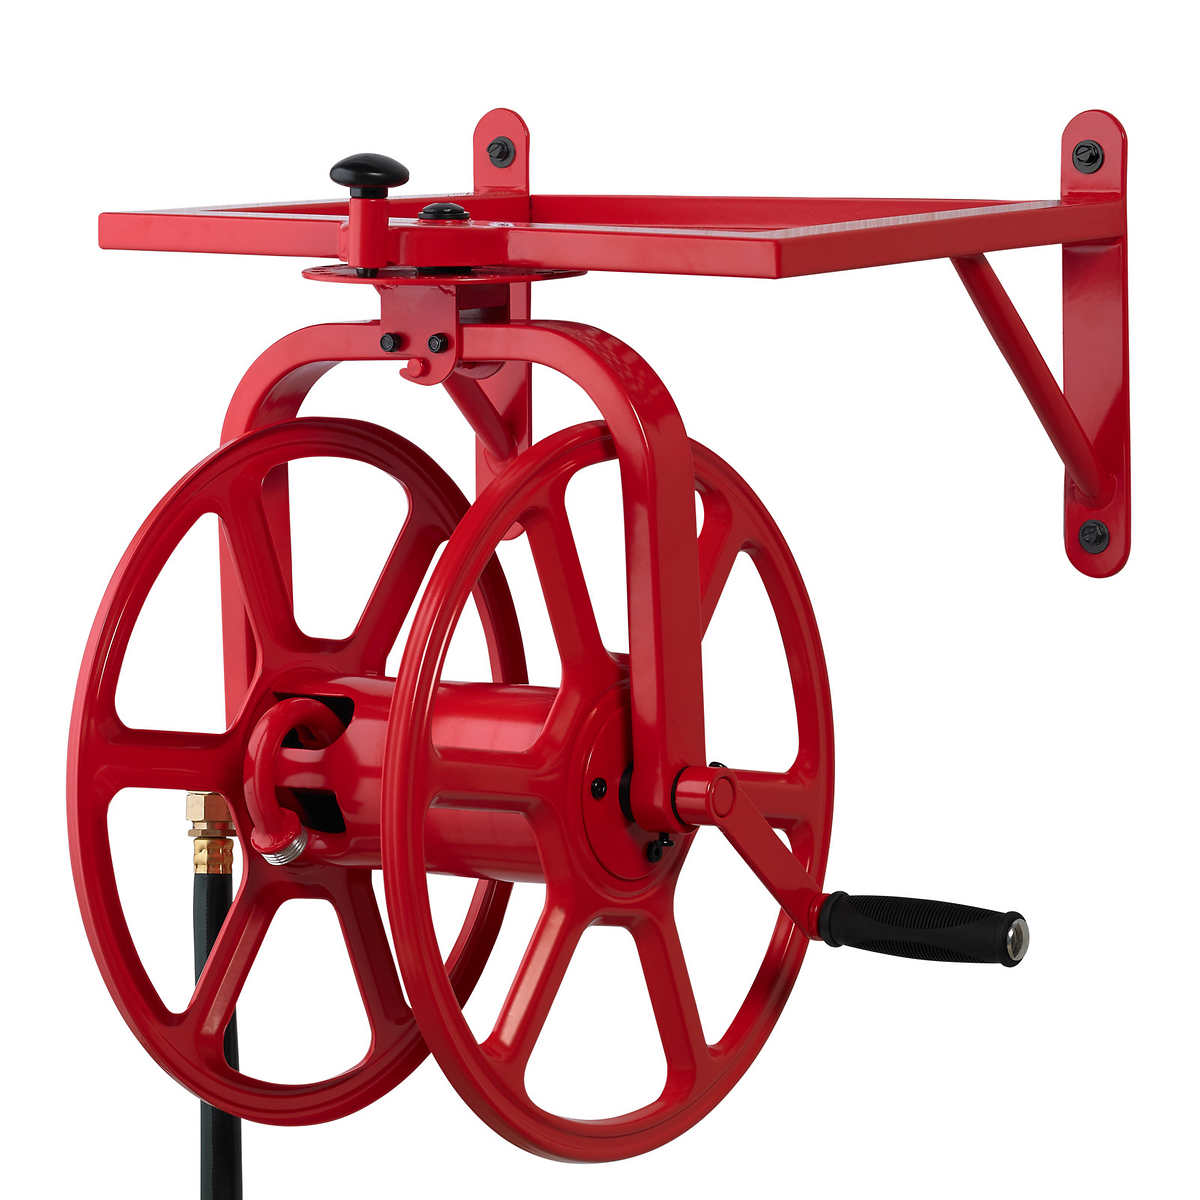 Installing your Liberty Garden Wall Mounted Hose Reel is easy for anyone --  even for only one person. Watch our video to learn how to install your  Model